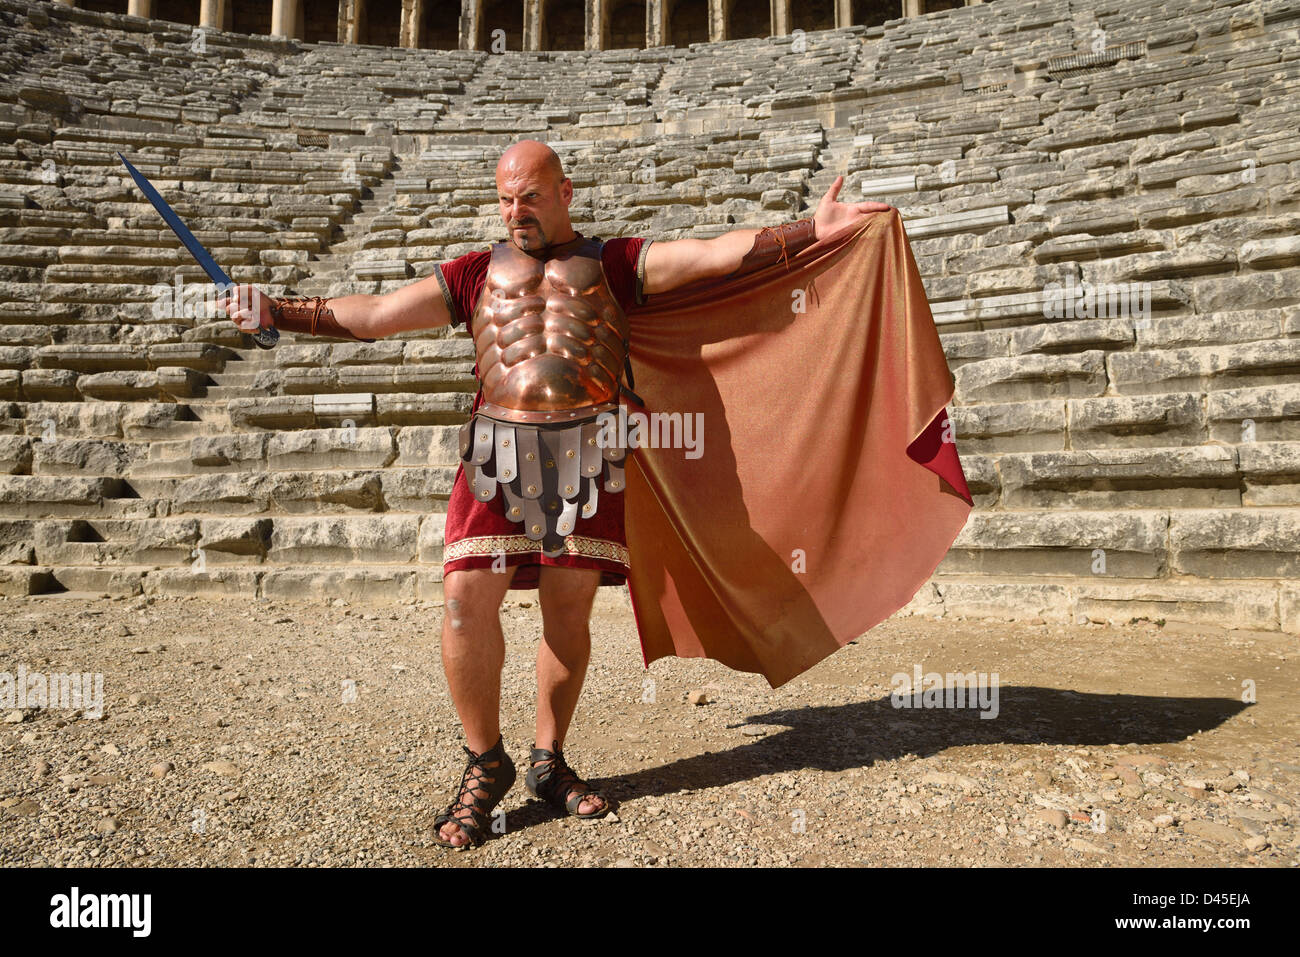 Glowering Roman Gladiator with sword spreading cape in sun on stage at the ancient Aspendos theater Turkey Stock Photo